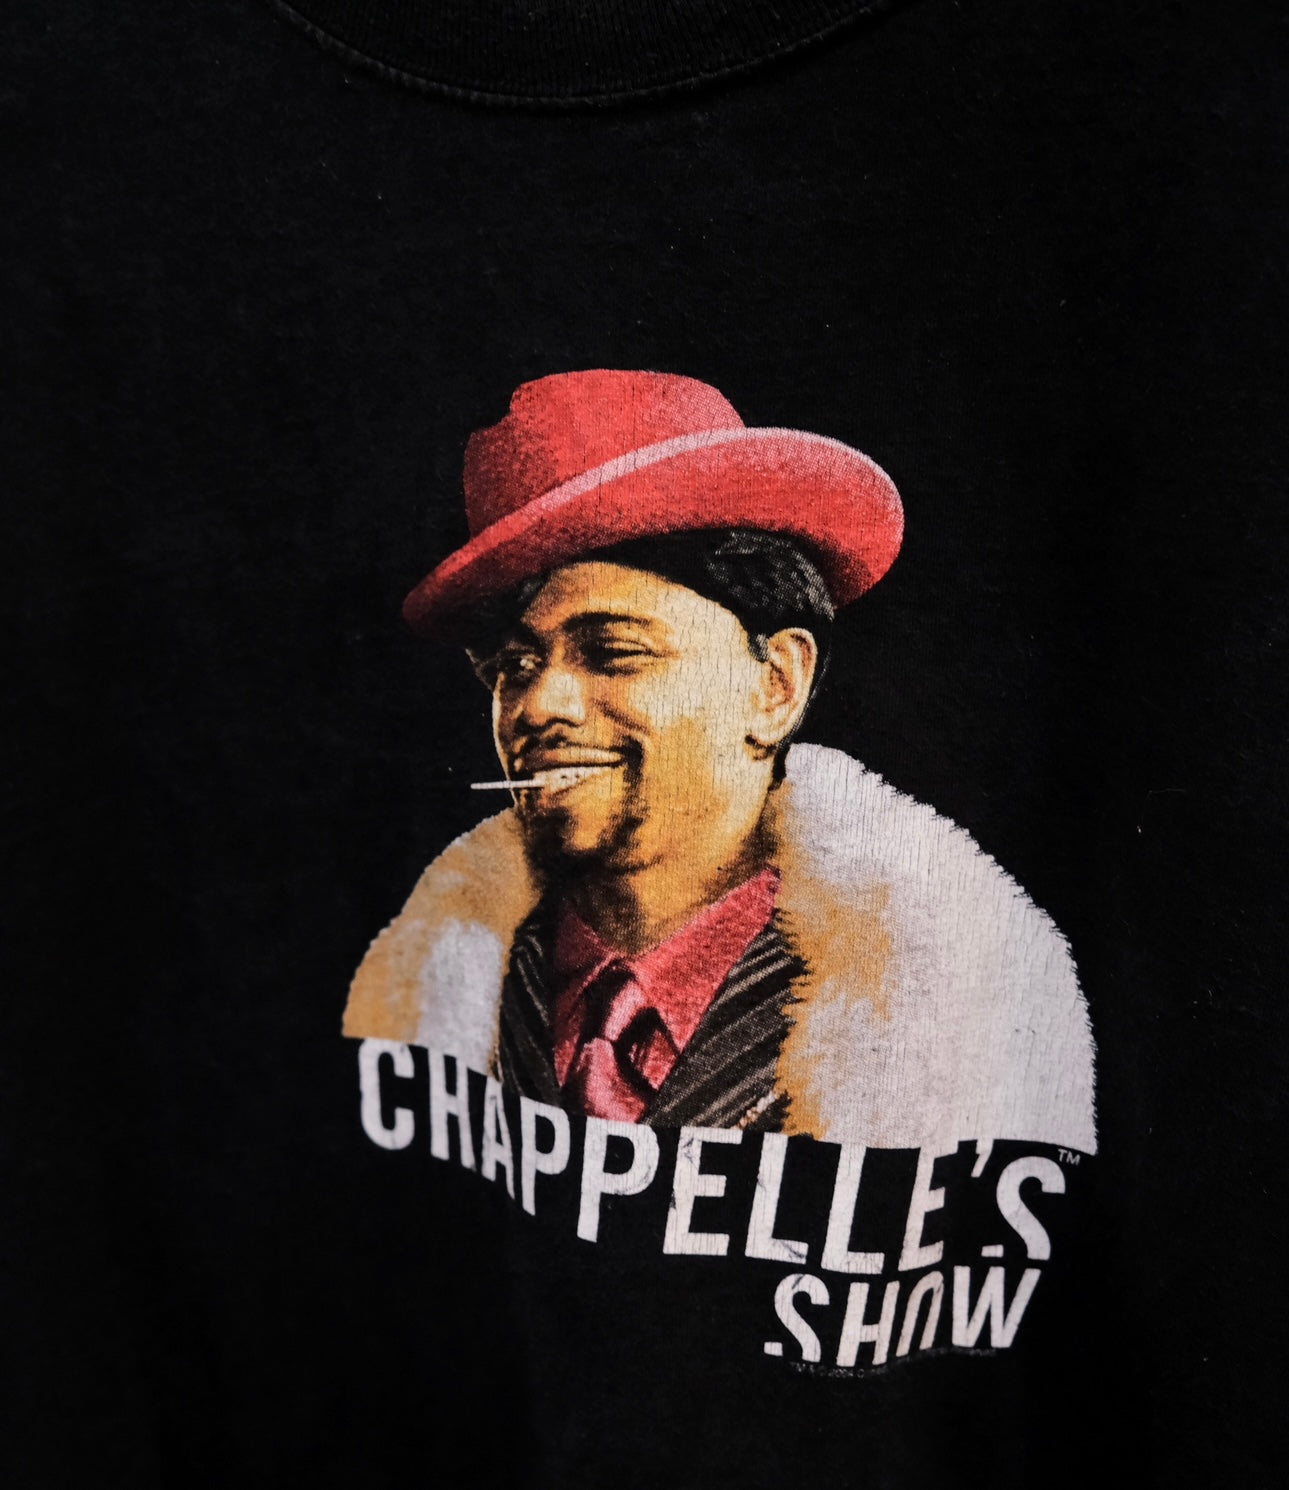 Chappelle's Show (Player Haters Ball) Promo Shirt